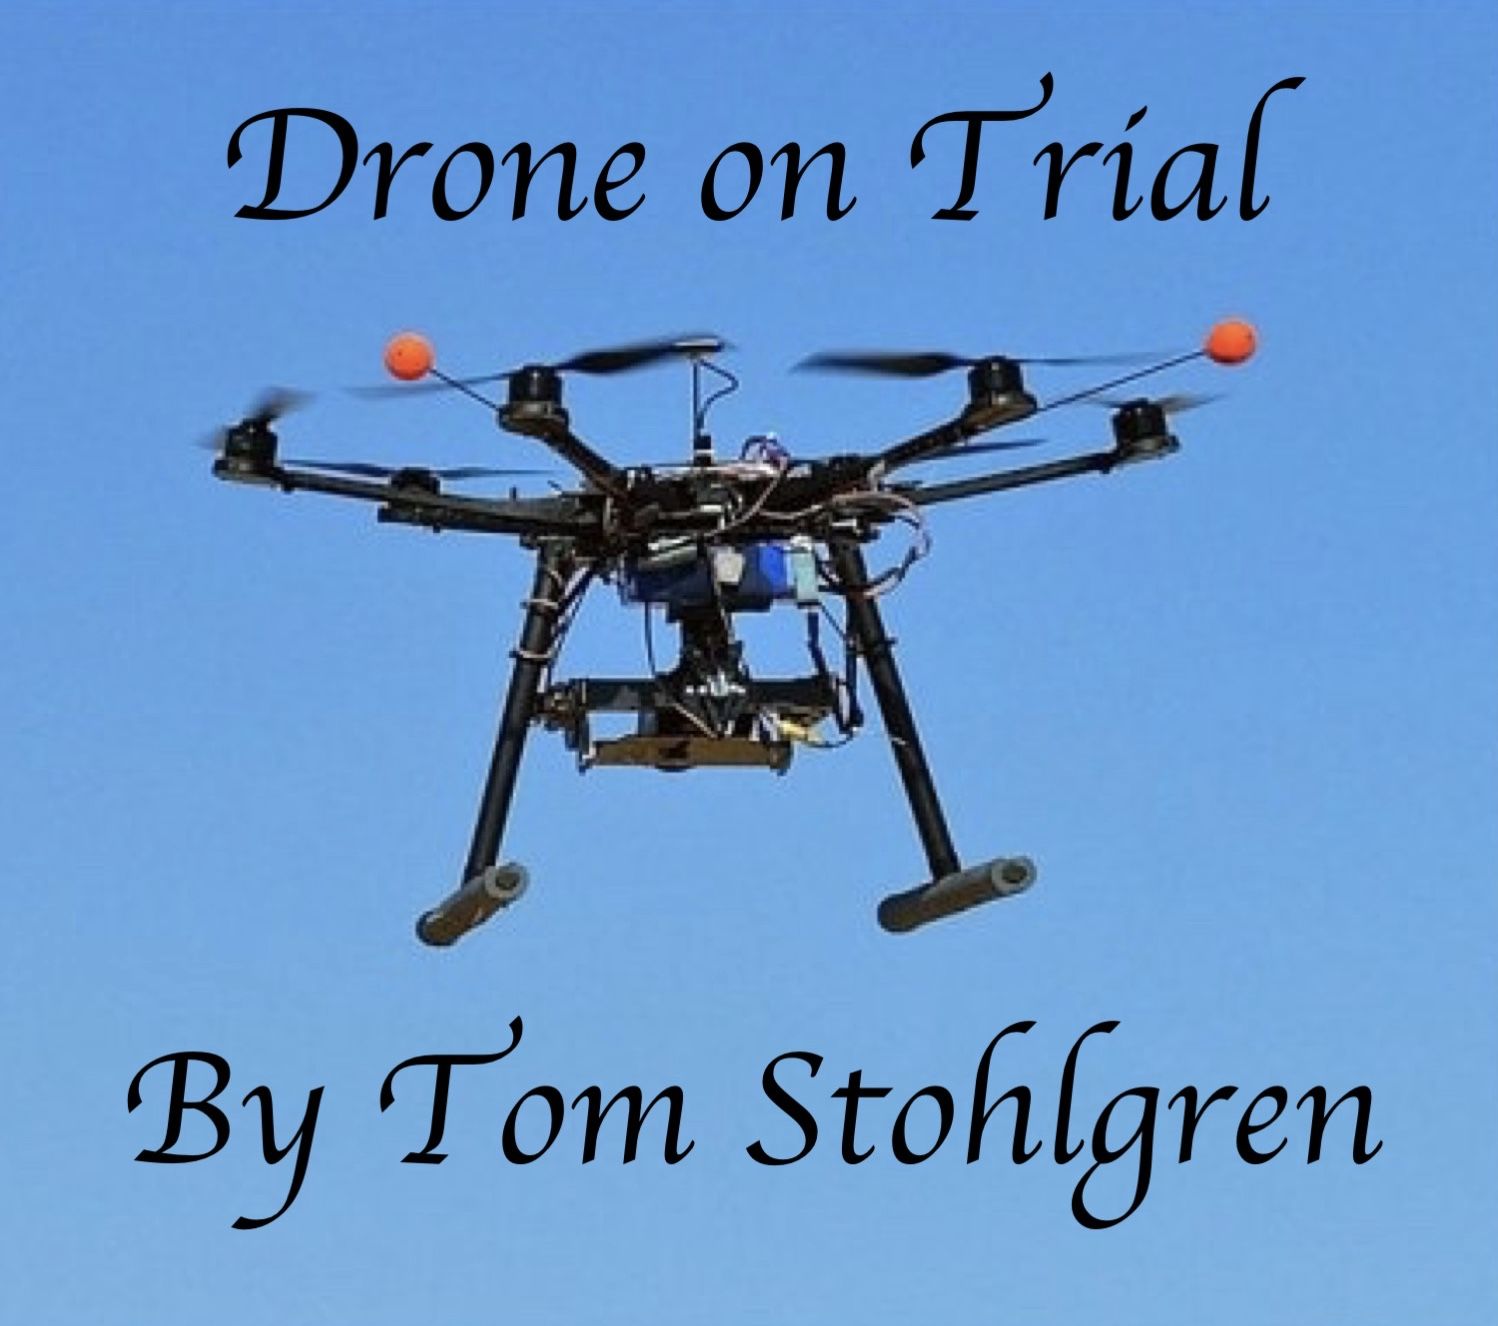 DRONE ON TRIAL